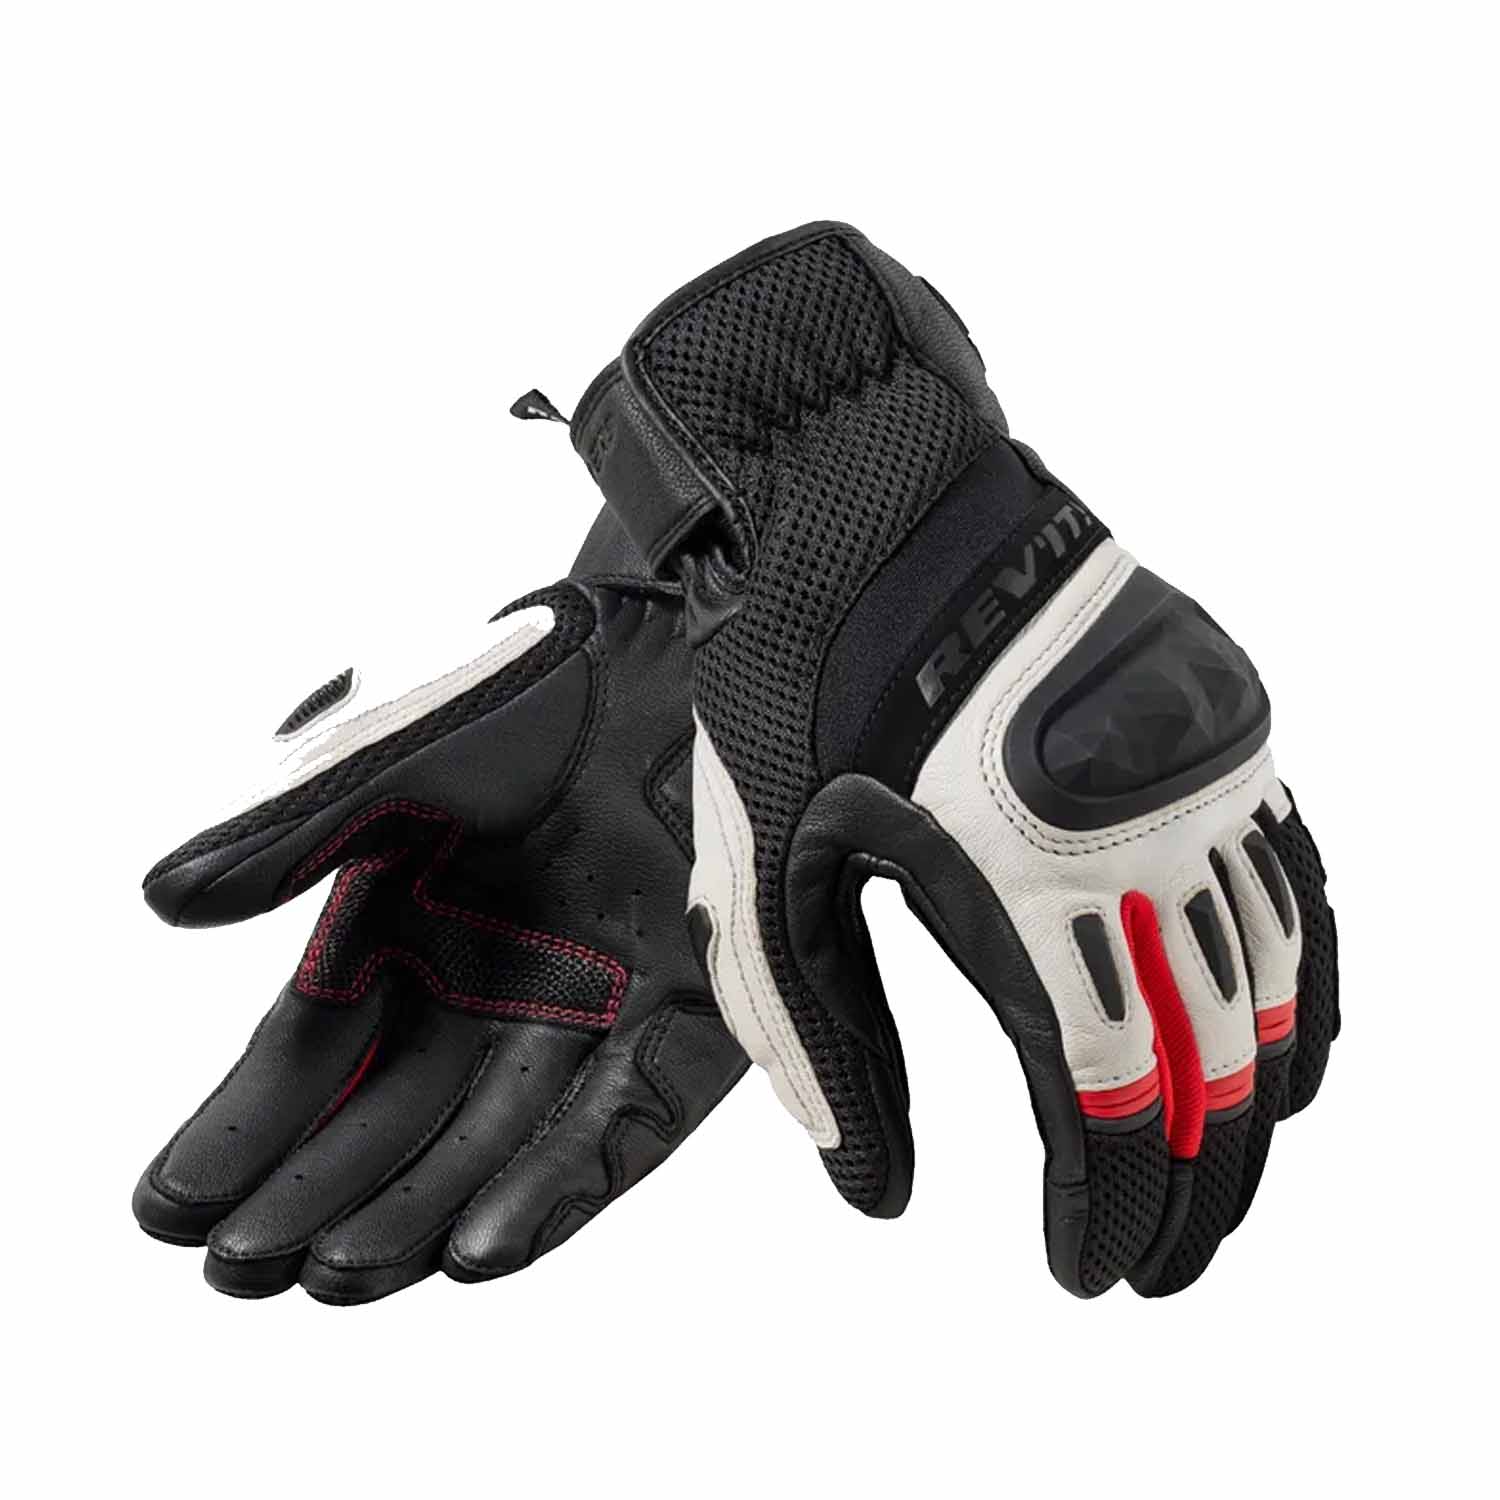 Image of EU REV'IT! Dirt 4 Gloves Black Red Taille 2XL